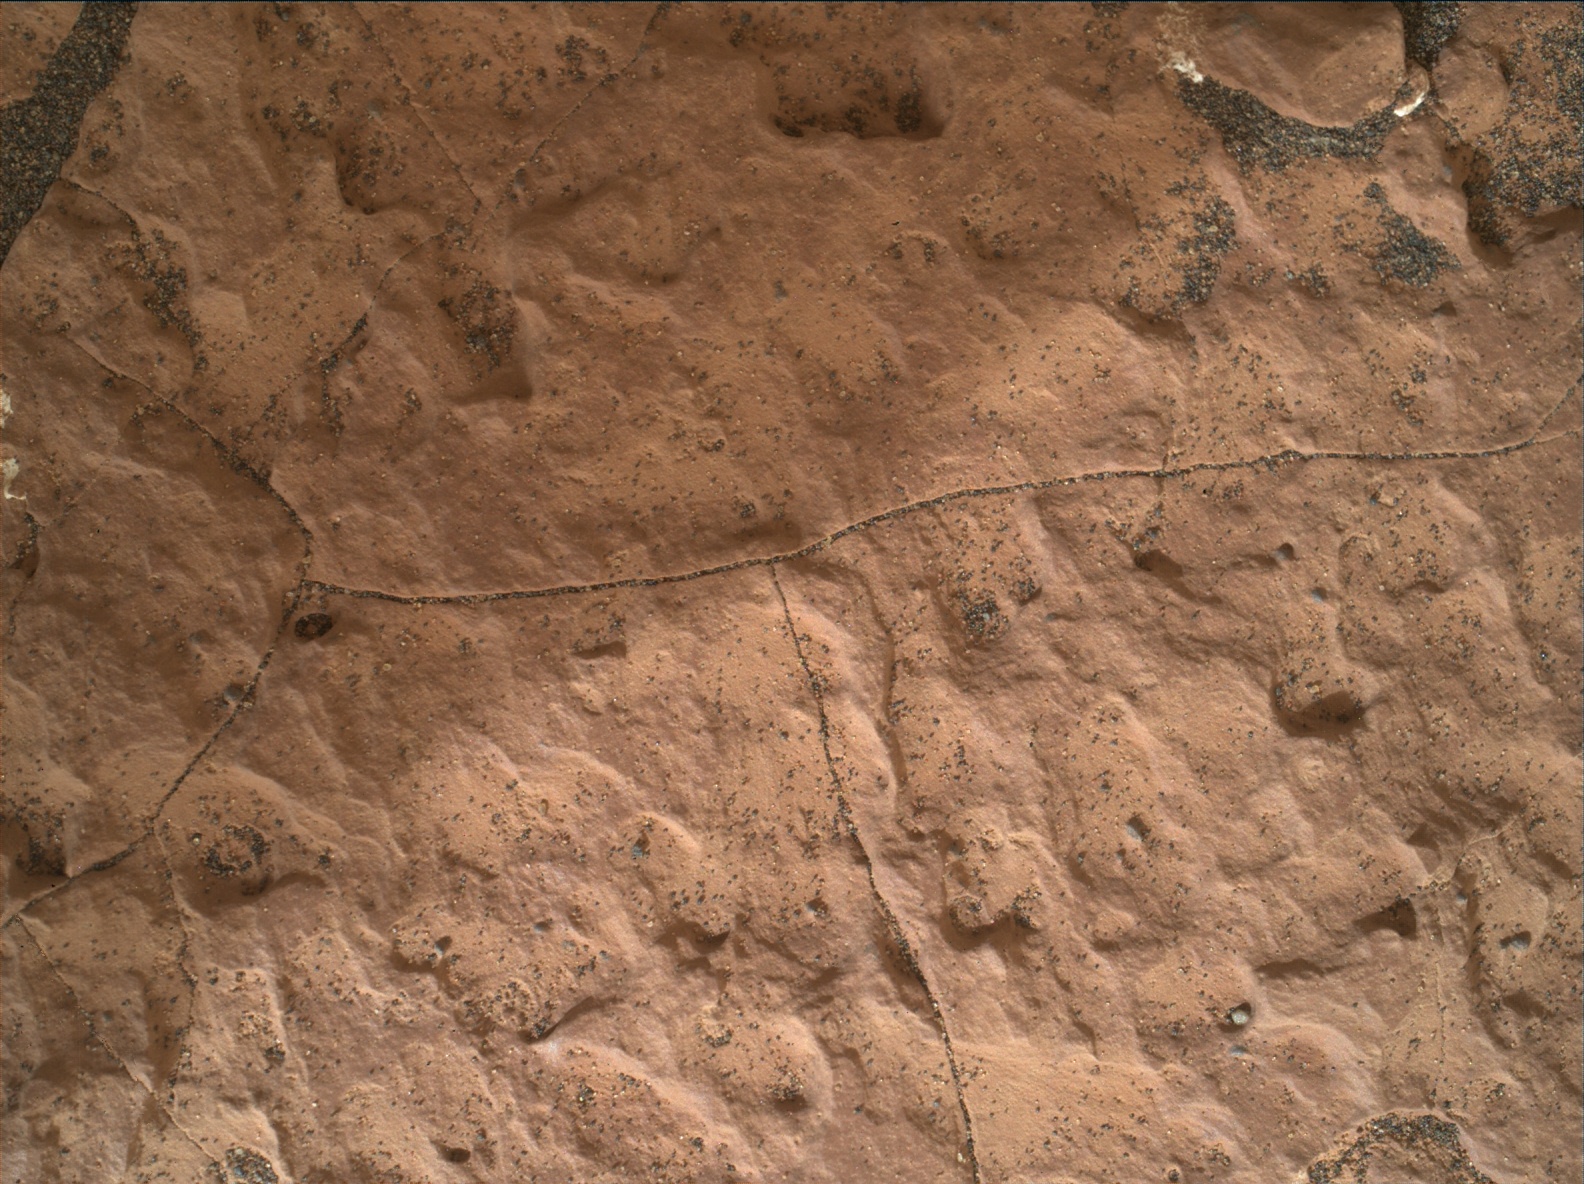 Nasa's Mars rover Curiosity acquired this image using its Mars Hand Lens Imager (MAHLI) on Sol 1640